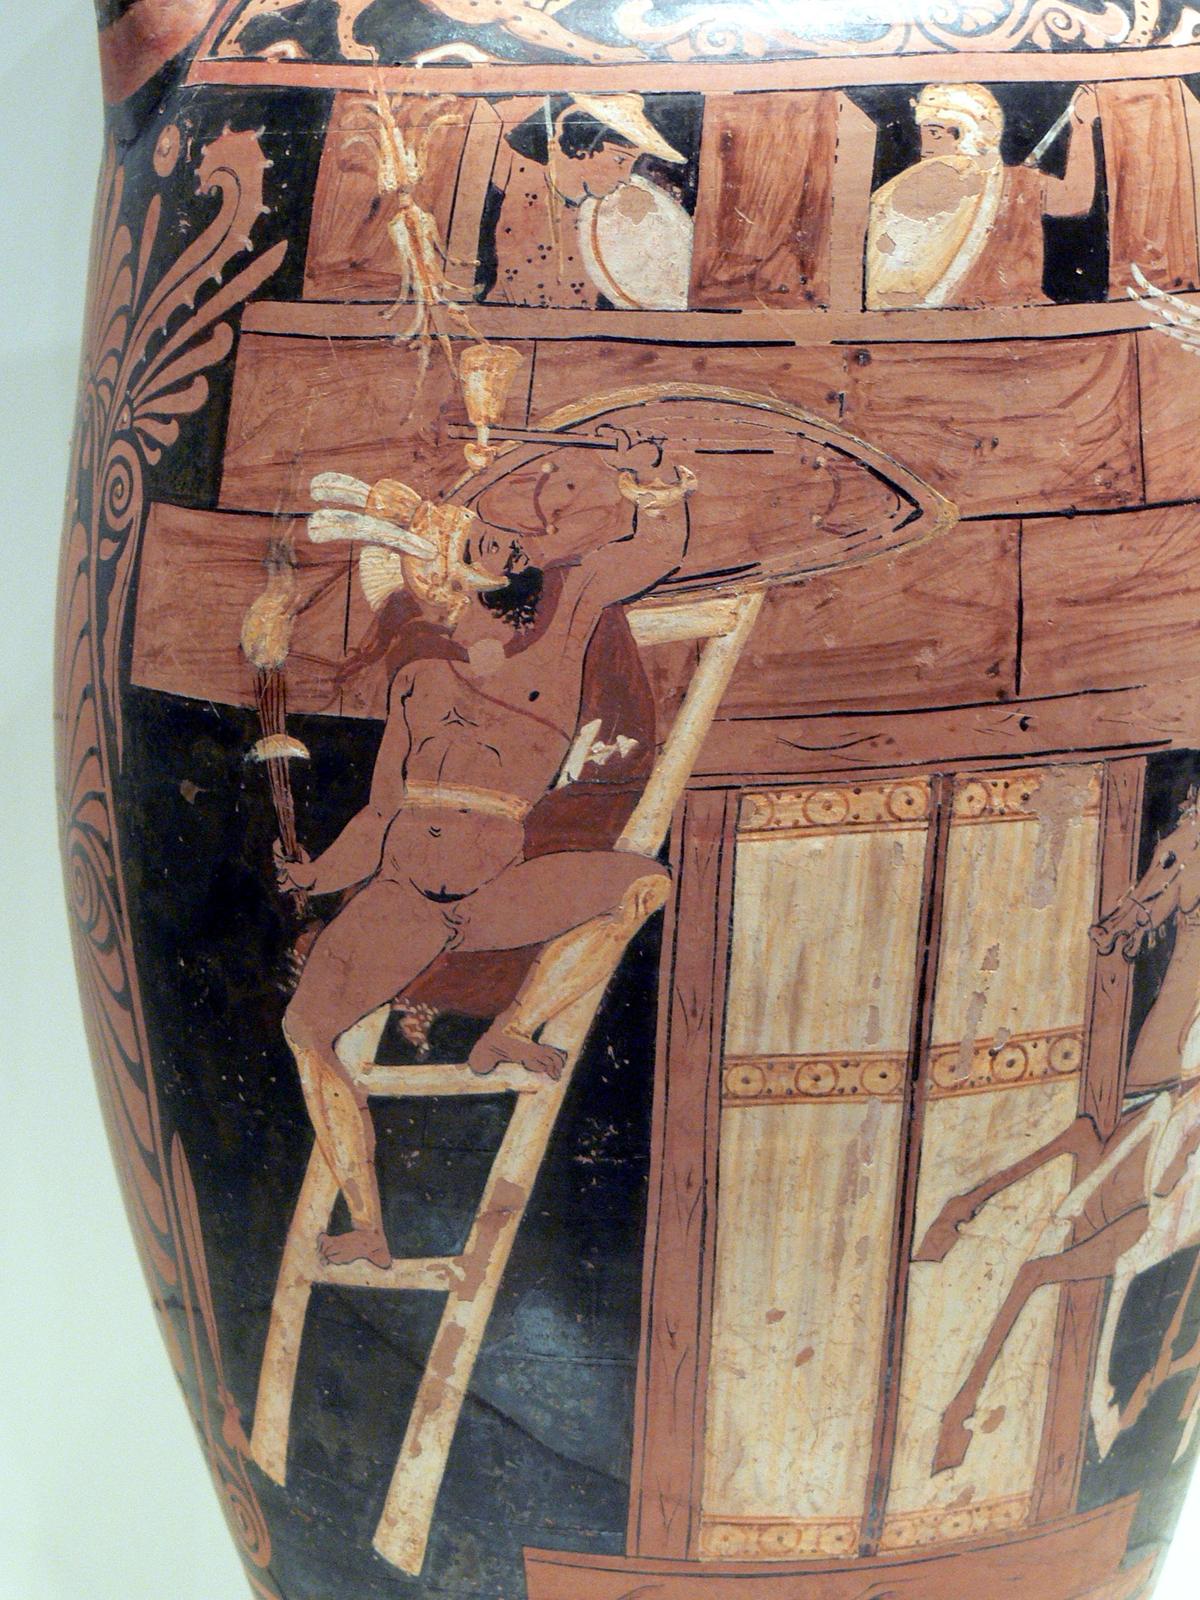 A scene from the play “The Seven Against Thebes” by Aeschylus: Capaneus scales the city walls to overthrow King Creon, who looks down from the battlements. Campanian red-figure on a neck-amphora, circa 340 B.C.; J. Paul Getty Museum. (Xenophon/CC BY-SA 3.0)